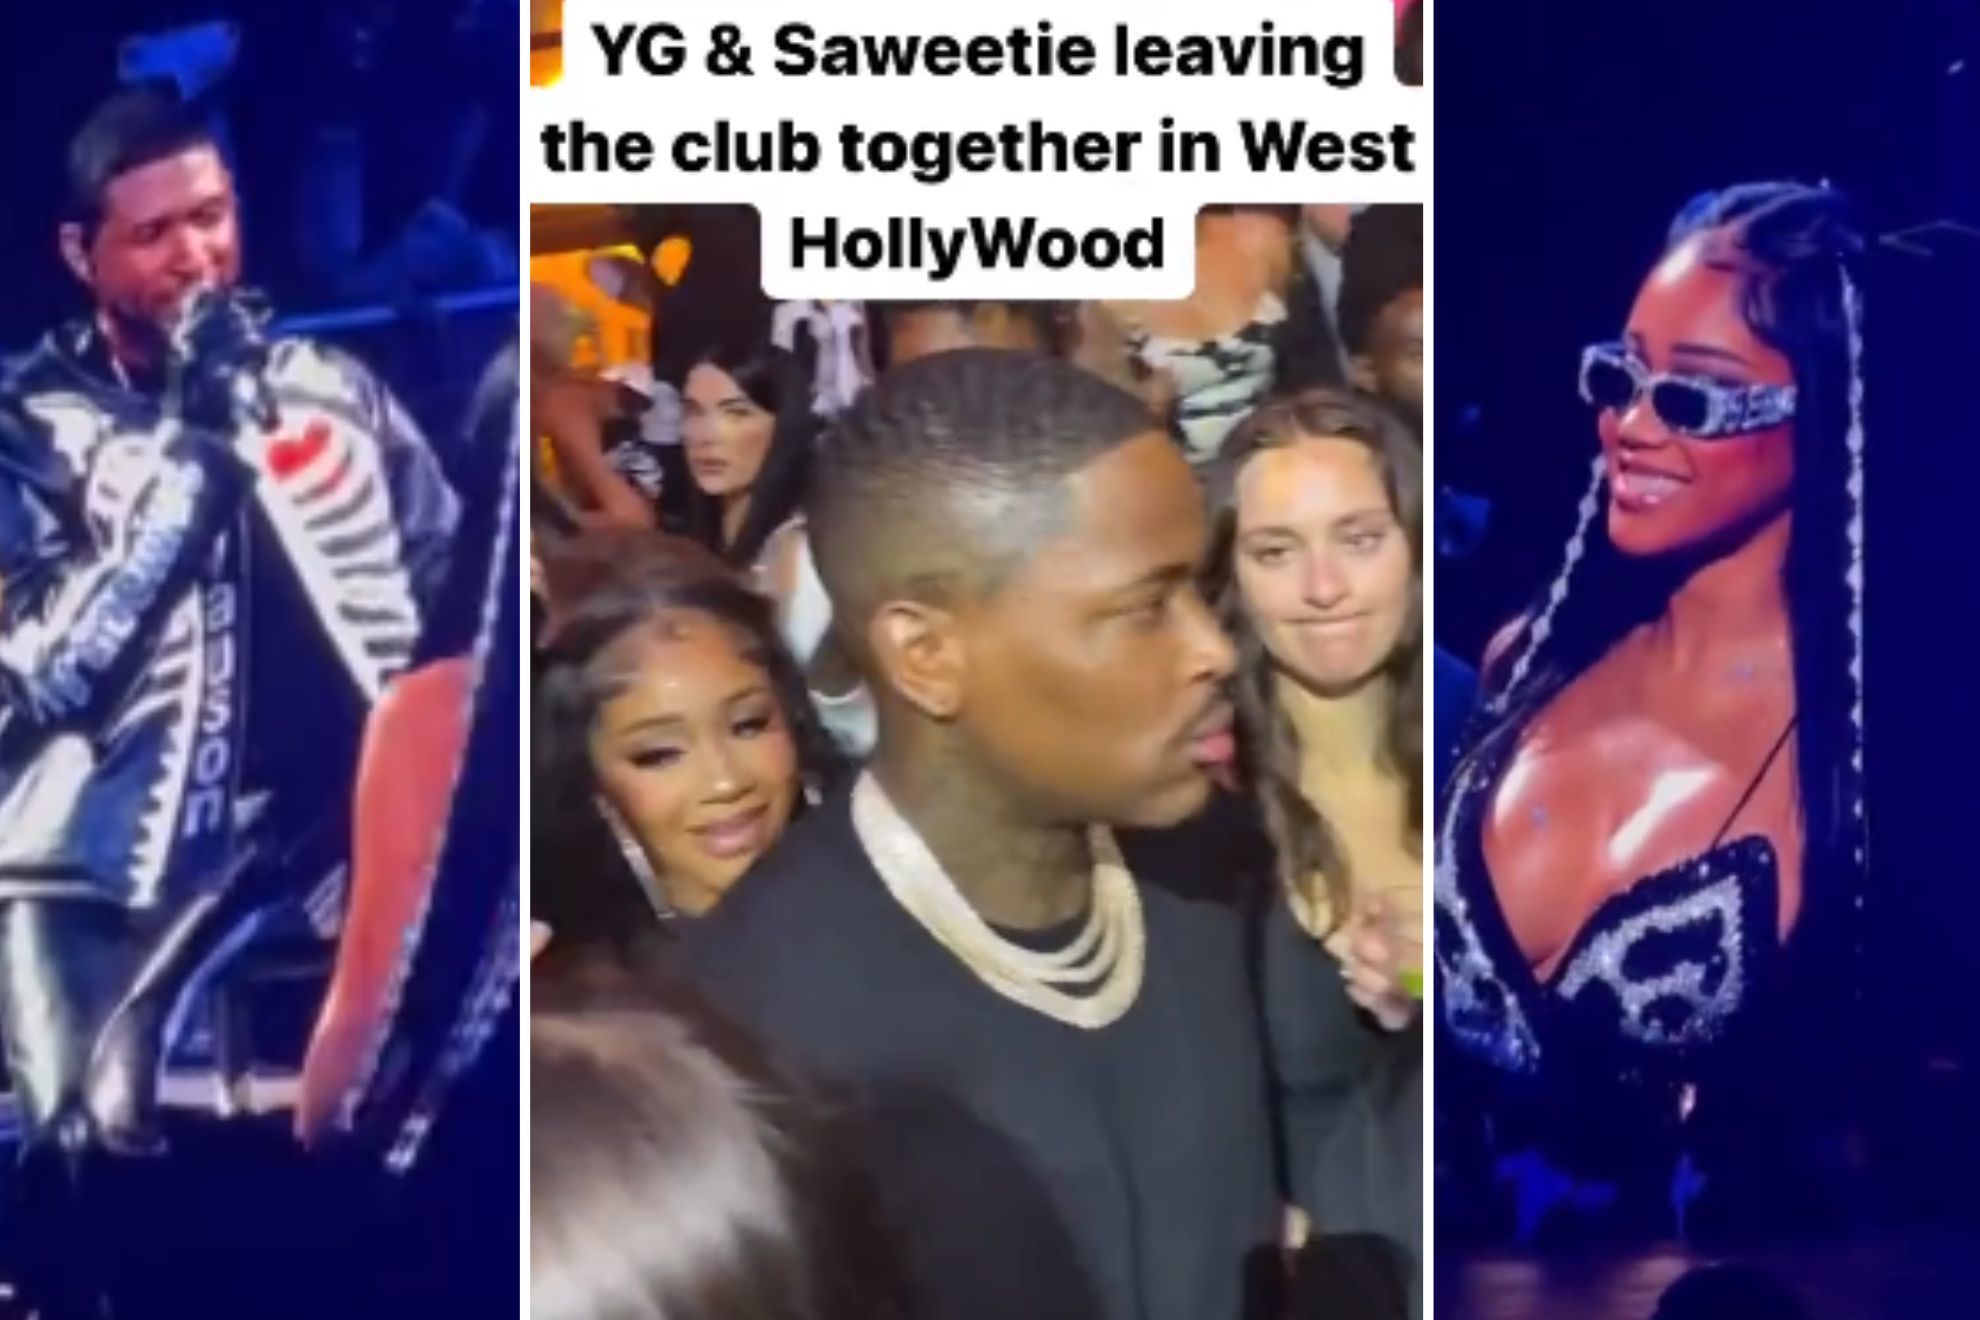 Usher gives Saweetie the Keke Palmer treatment, how did rapper YG react?